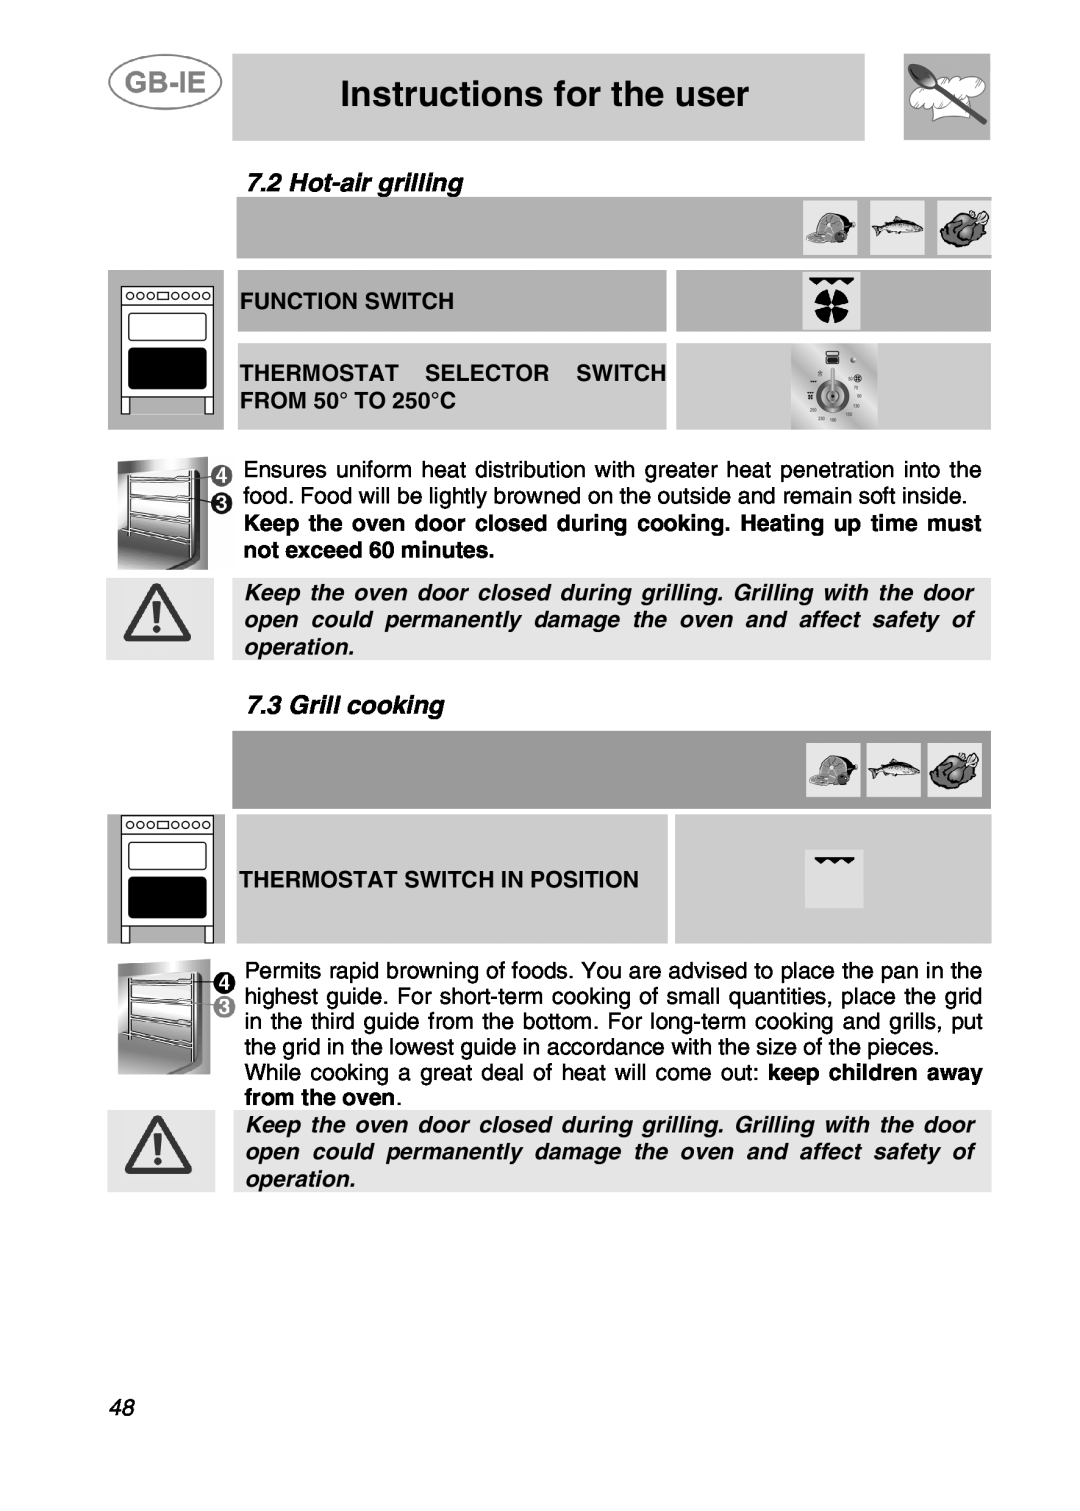 Smeg A42C-5, A42C-2 manual Hot-air grilling, Grill cooking, Thermostat Switch In Position, Instructions for the user 